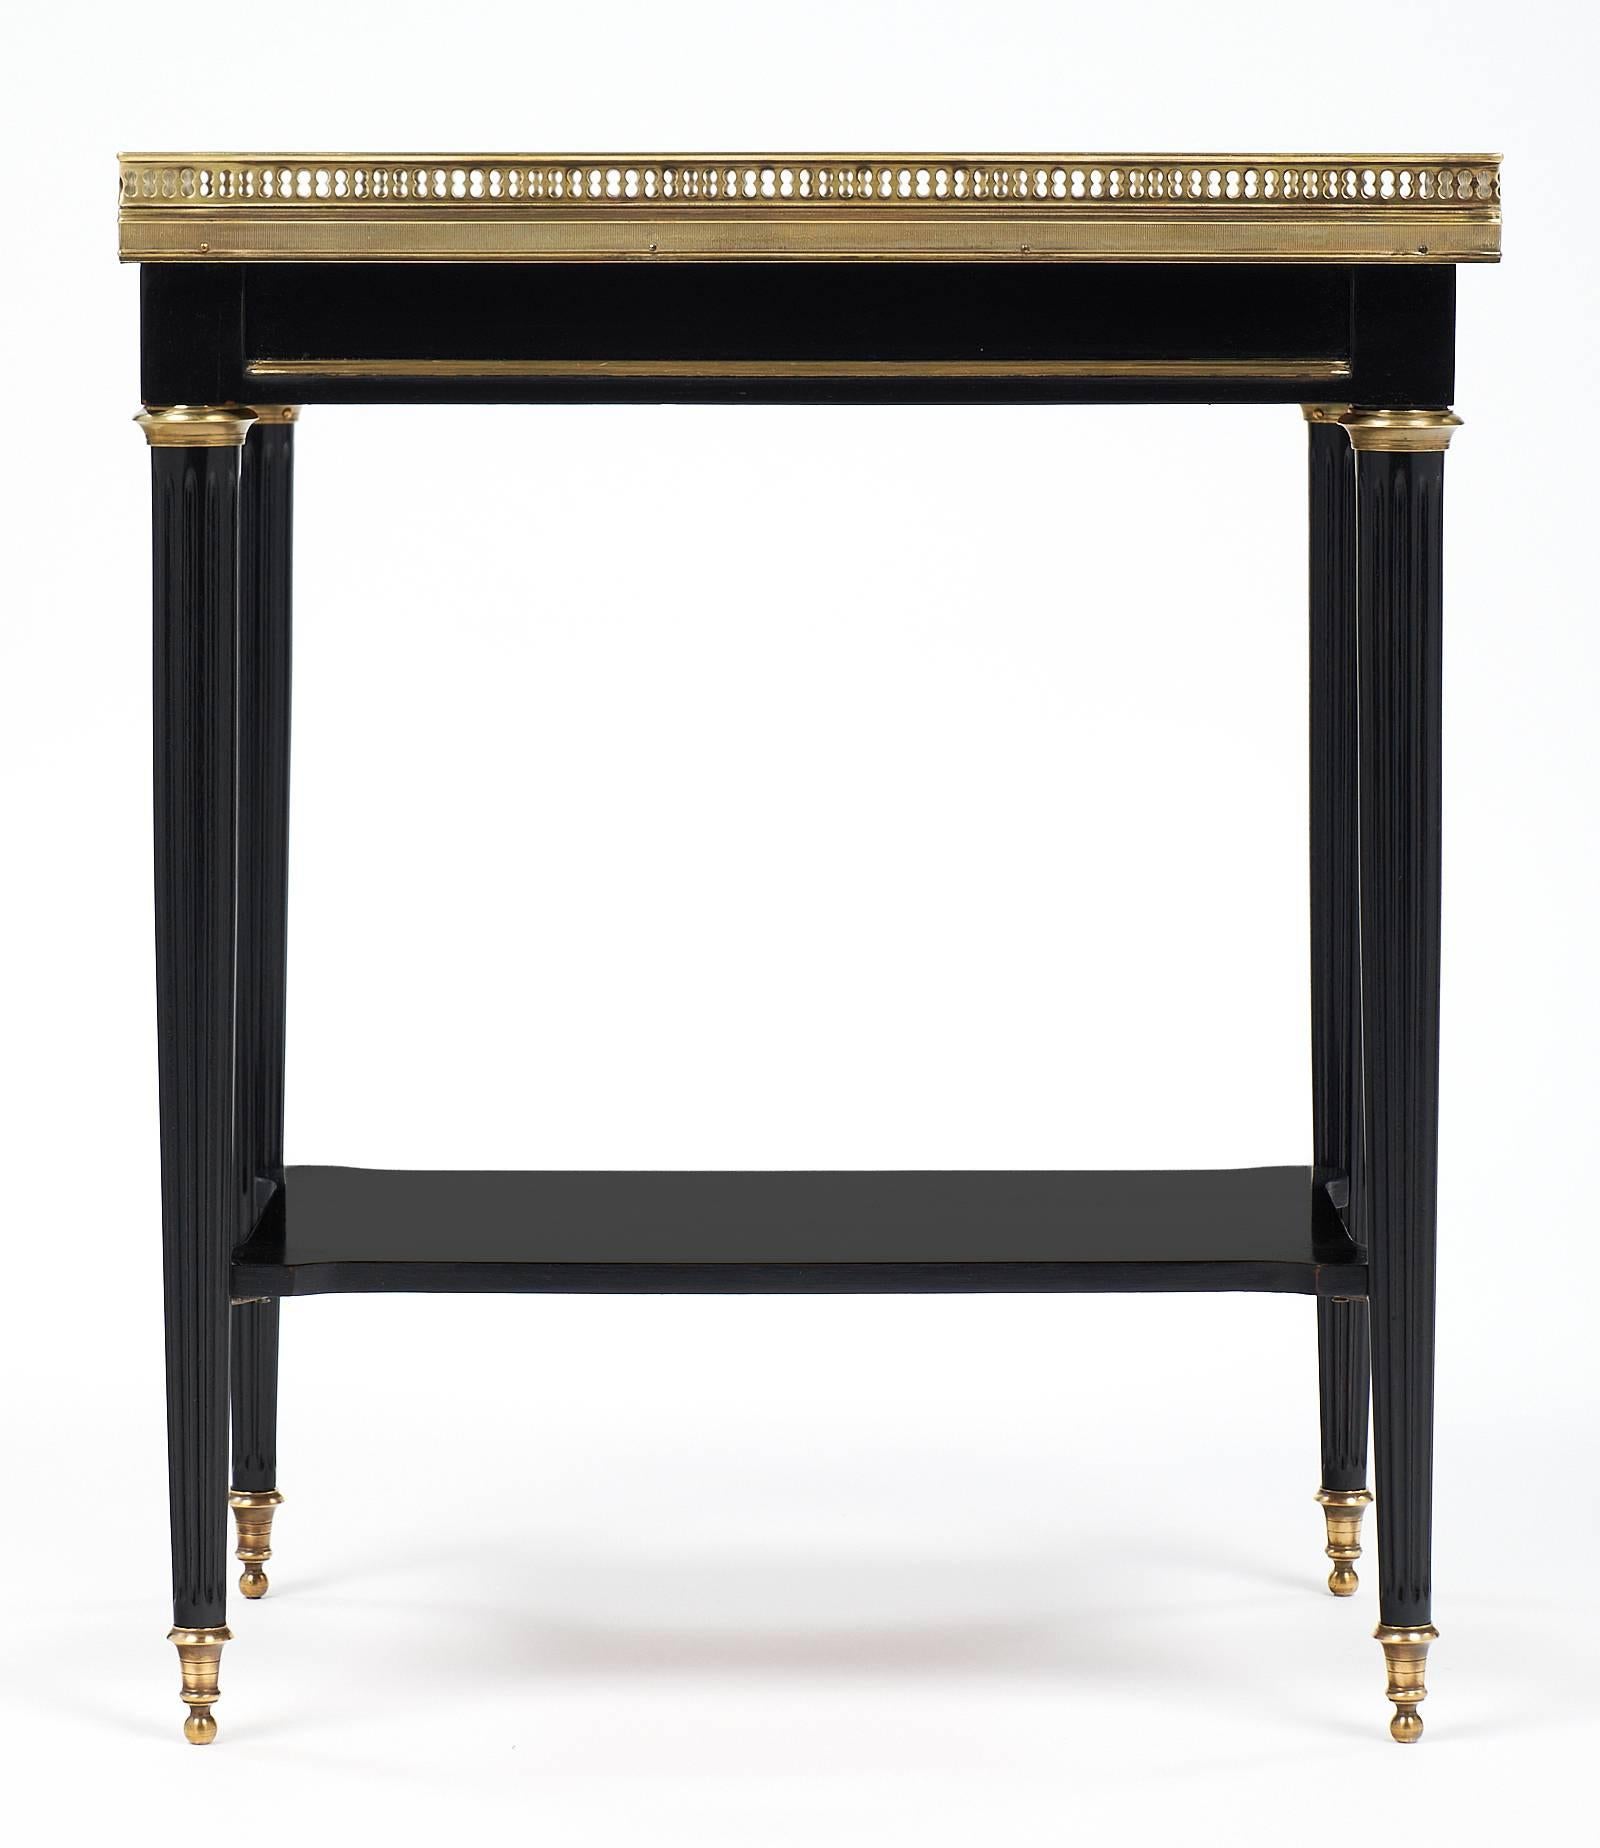 Charming Louis XVI style antique French side table. This piece has a beautiful Carrara marble top, bronze feet and capitals, and finely crafted gilt brass trims and gallery. We can't resist the precise craftsmanship and the refined feel of the piece!